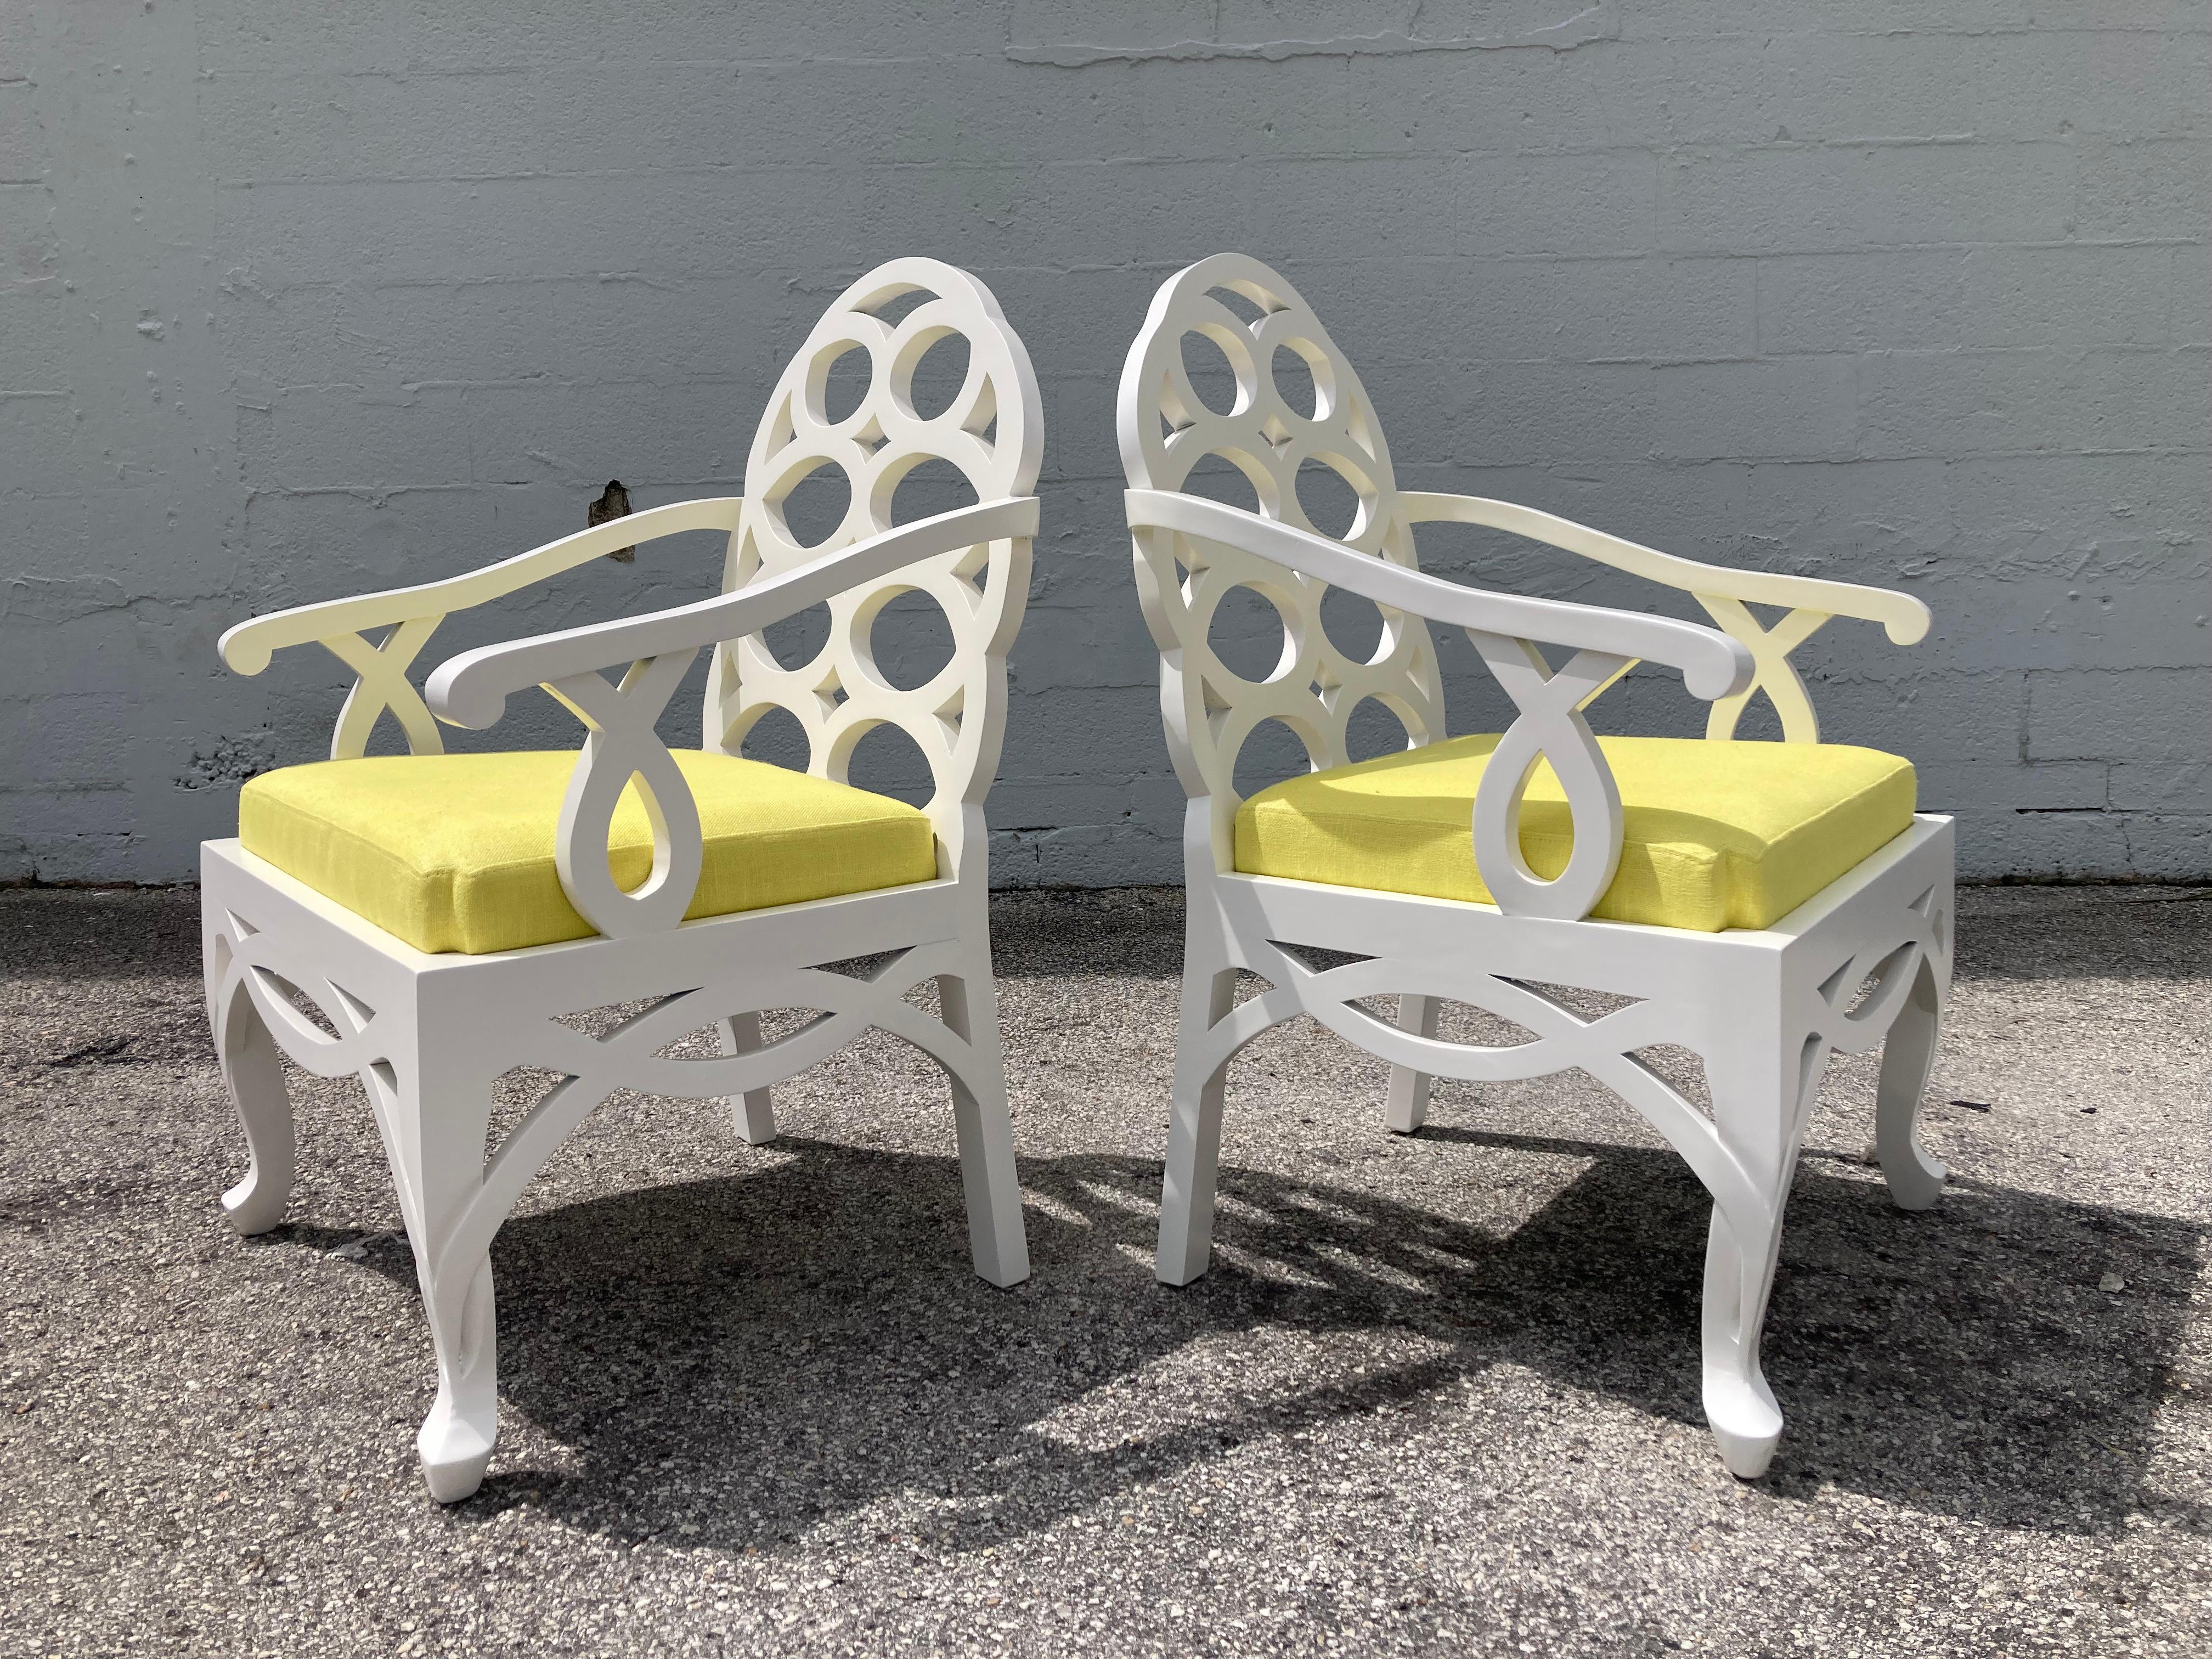 Pair of Frances Elkins loop lounge chairs, based on the 1930’s iconic models. The chairs have satin off-white lacquer finish and freshly upholstered yellow seats.
The chairs are in great condition, ready for a new home.